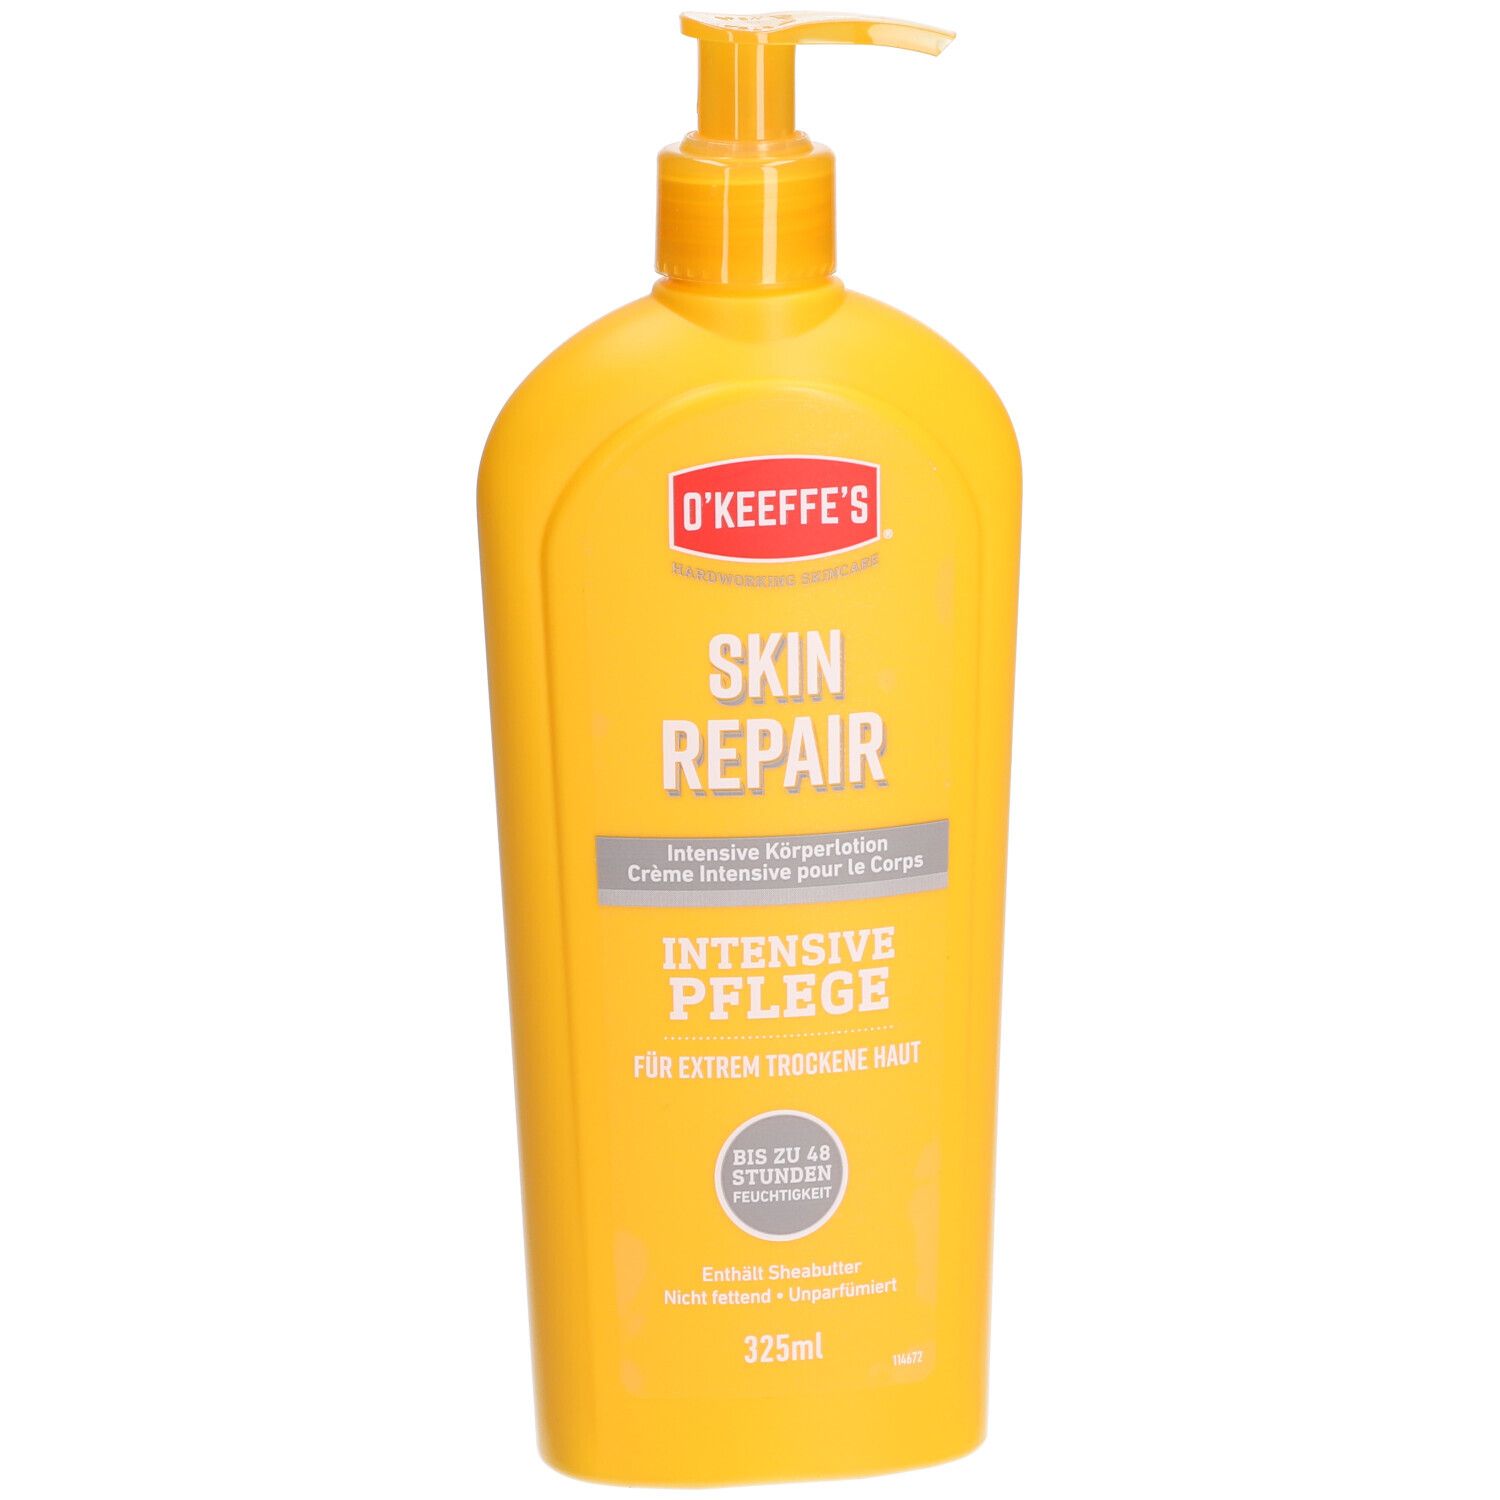 O'Keeffe's Skin Repair Lotion Corps